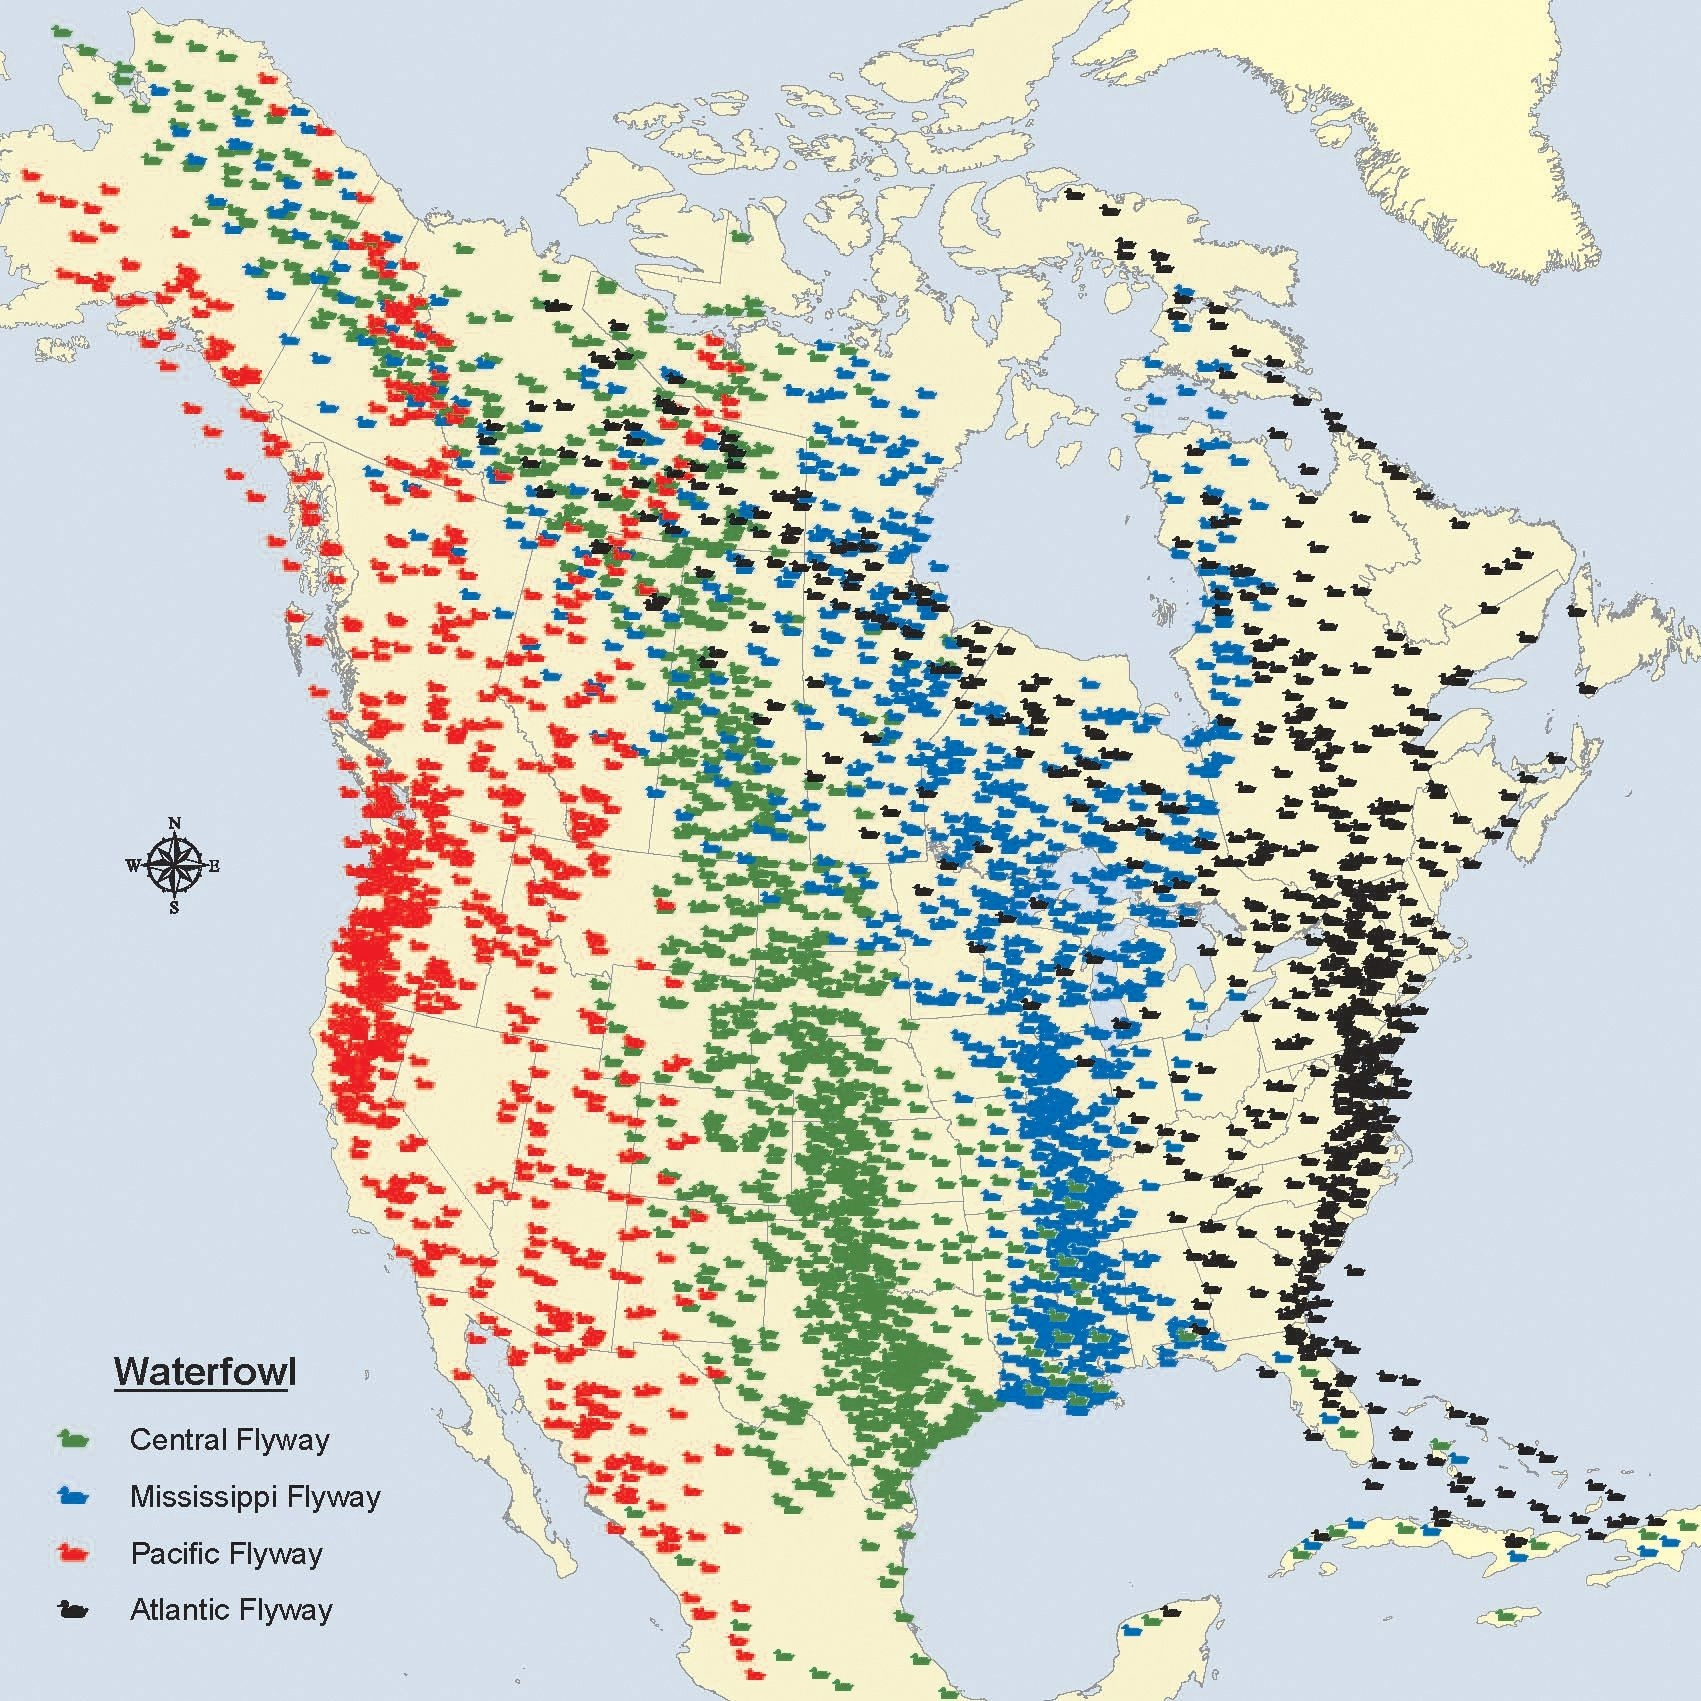 A map of the migratory flyways of North America.